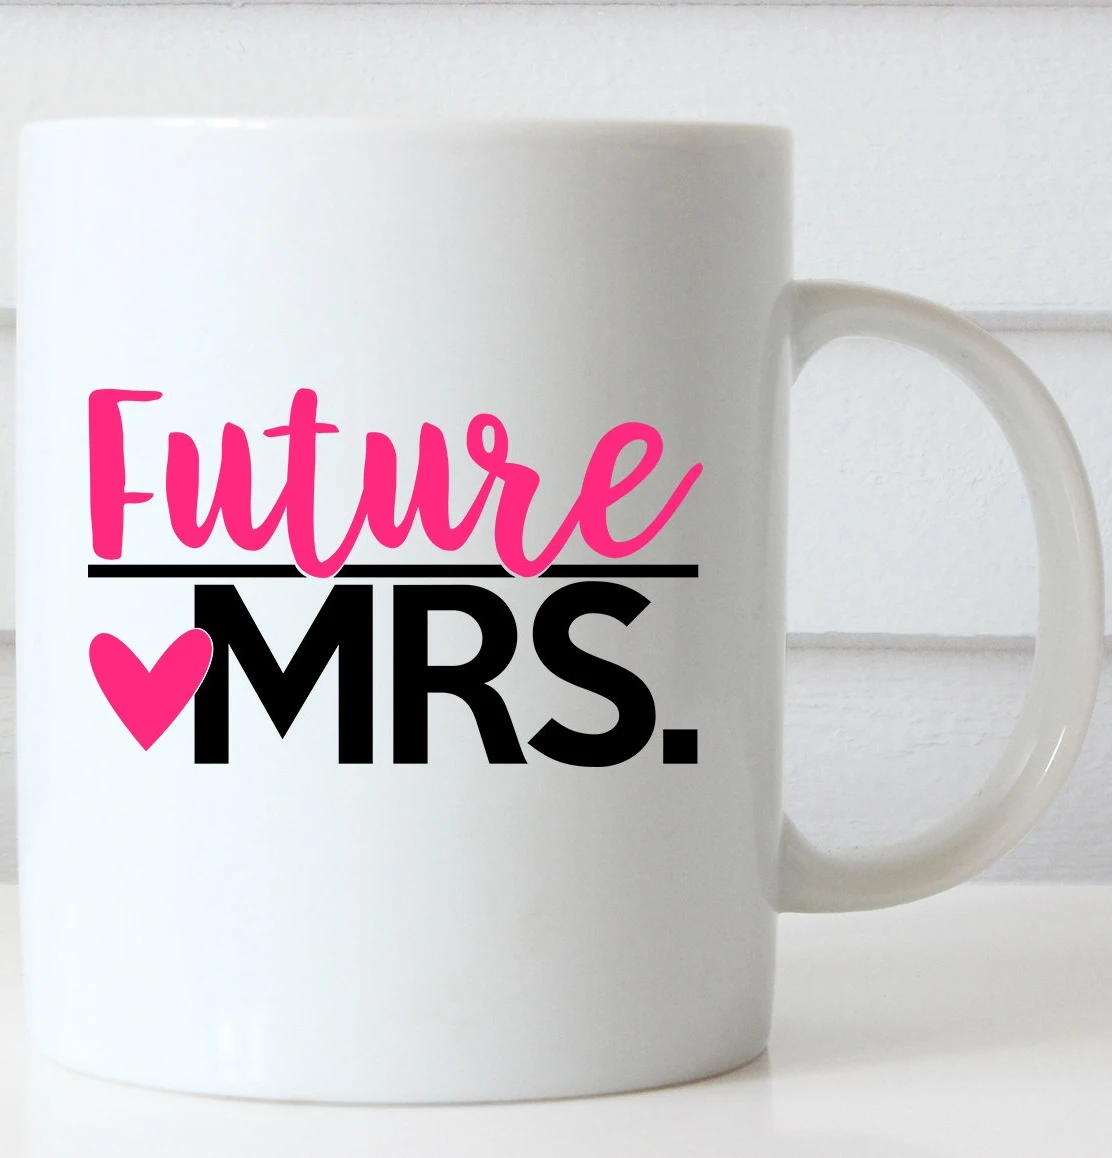 

Girlfriend Gifts Wife Cups Father's Day Gifts Beer Mugs Tea Kids Gifts Ceramic Coffee Mug Novelty Friend Gifts Home Decal